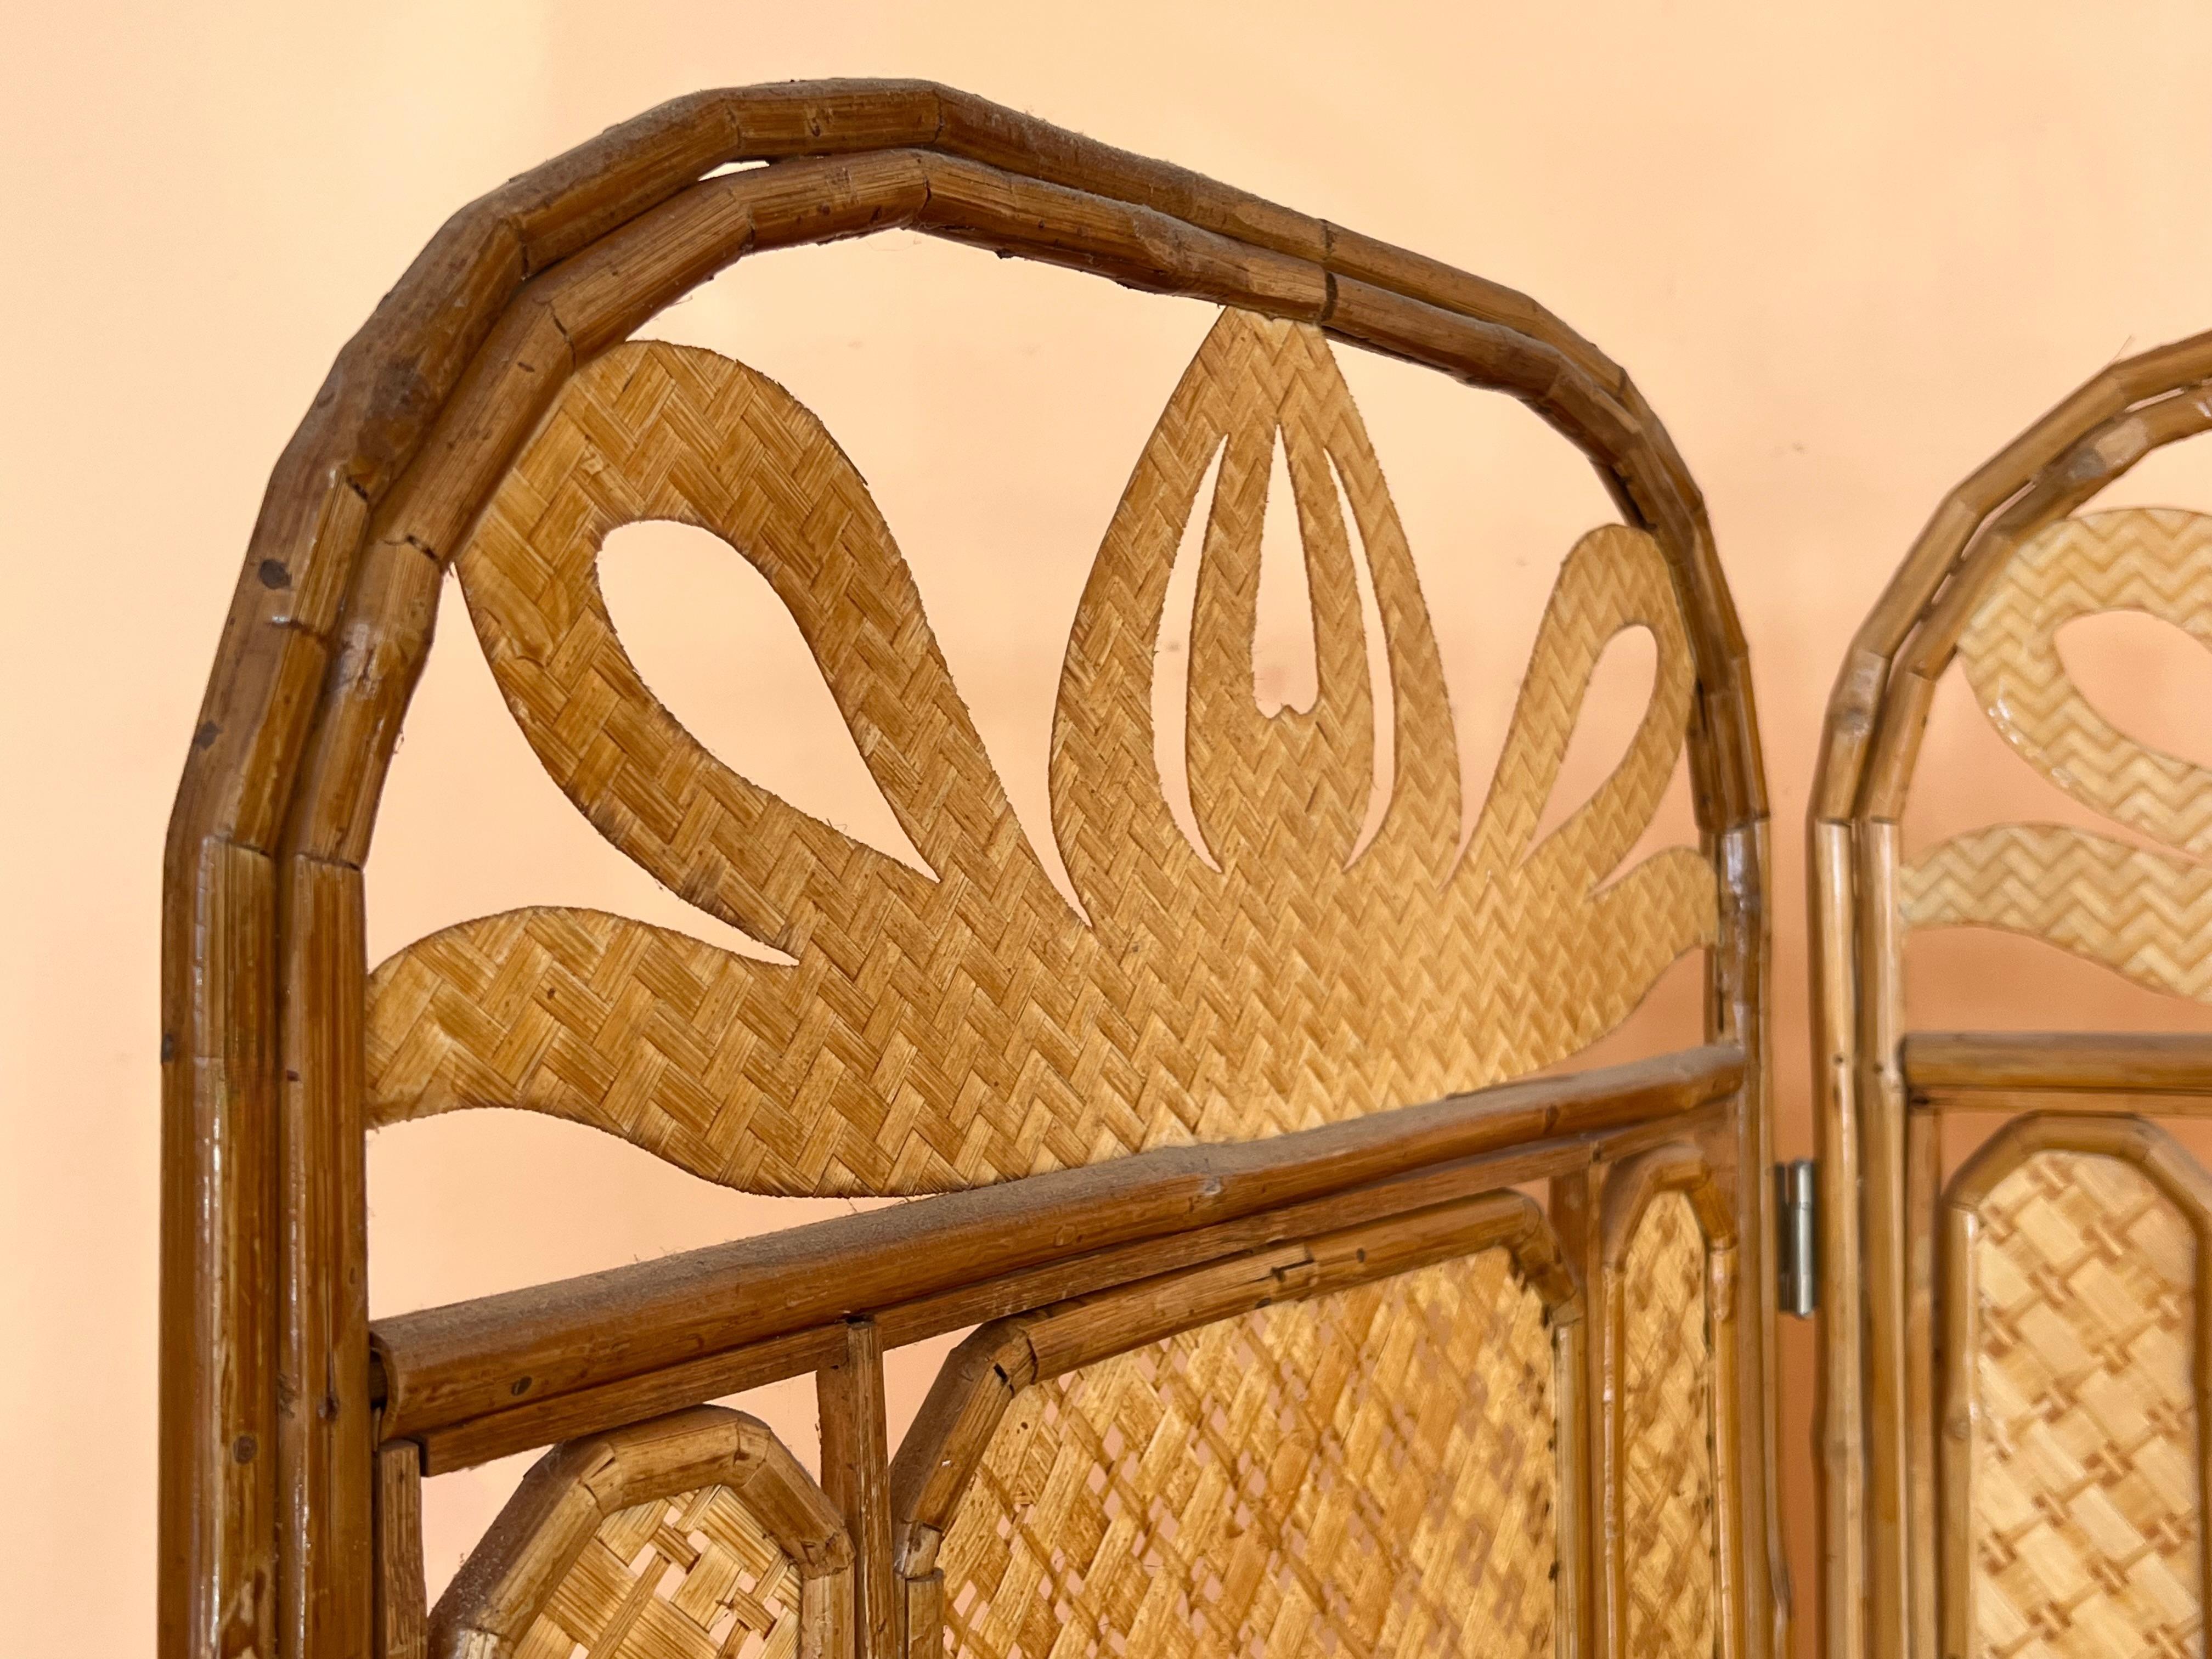 Bamboo Sculptural Three-Panel Folding Screen Room Divider in Rattan and Wicker, 1960s For Sale